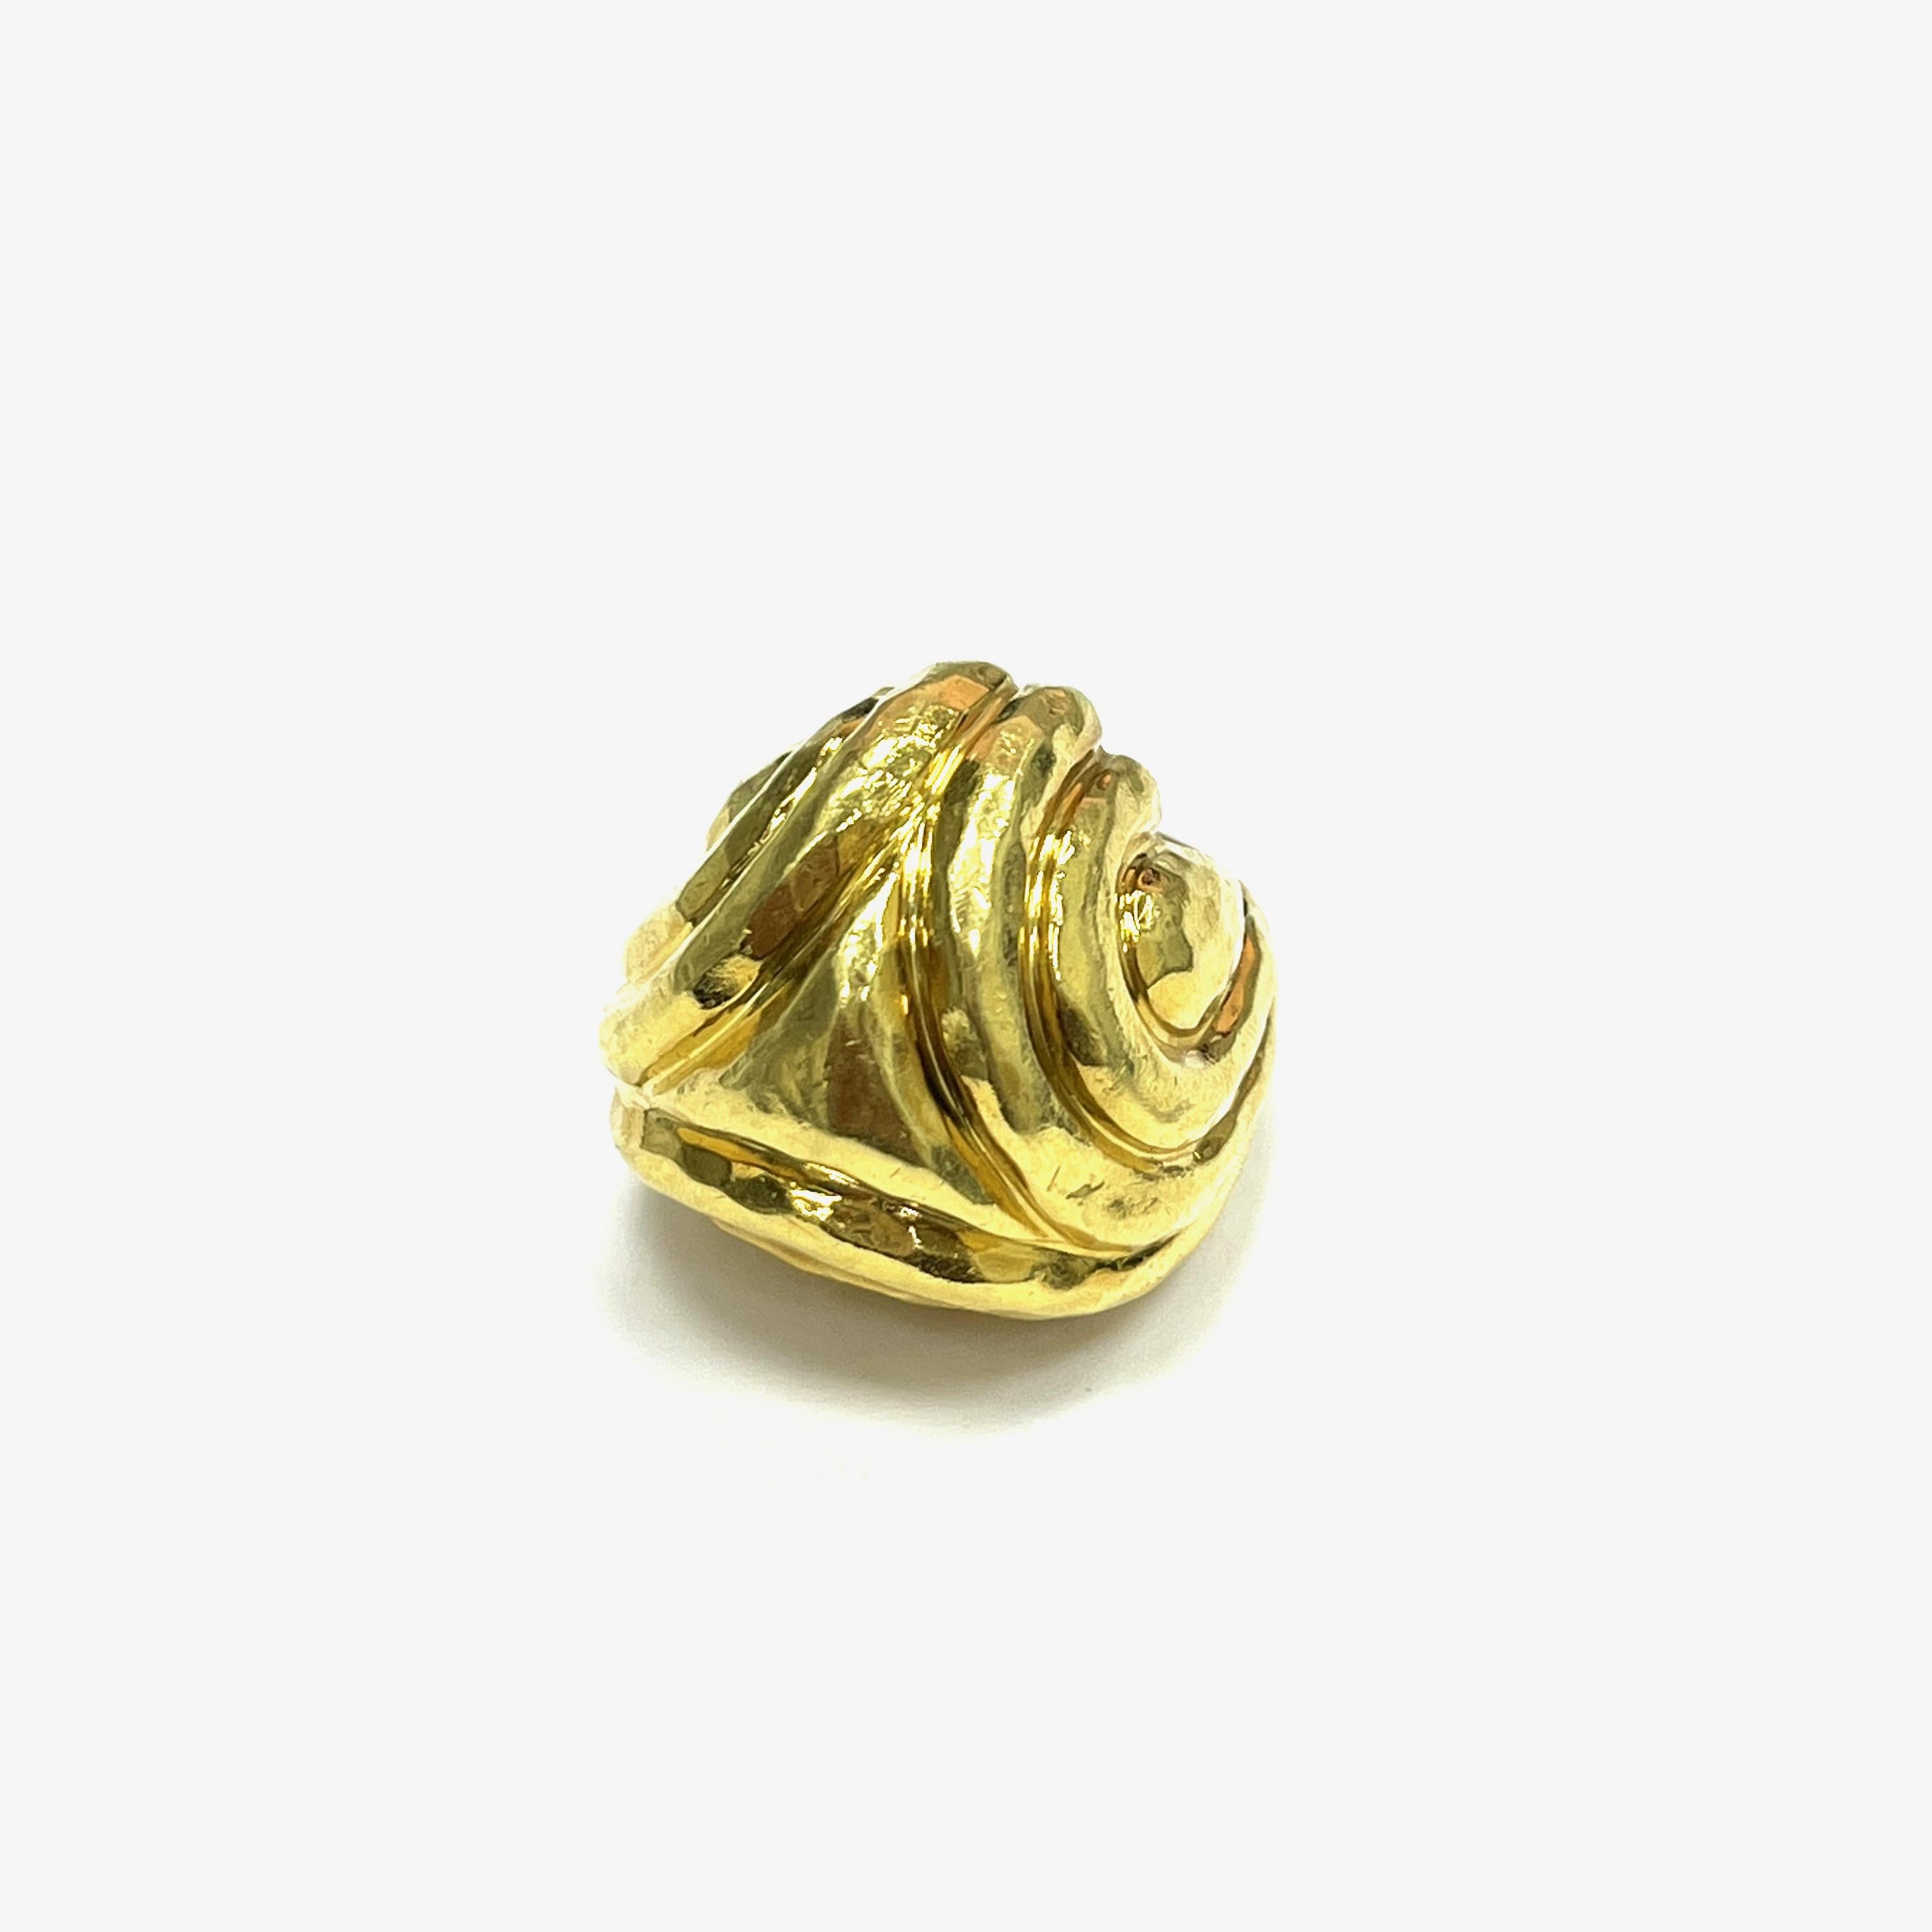 Henry Dunay frog hammered gold ring

A big ring featuring a frog's face made out of hammered 18 karat yellow gold; marked Dunay, 18k

Size: 7 US; top width 2.5 cm
Total weight: 26.1 grams